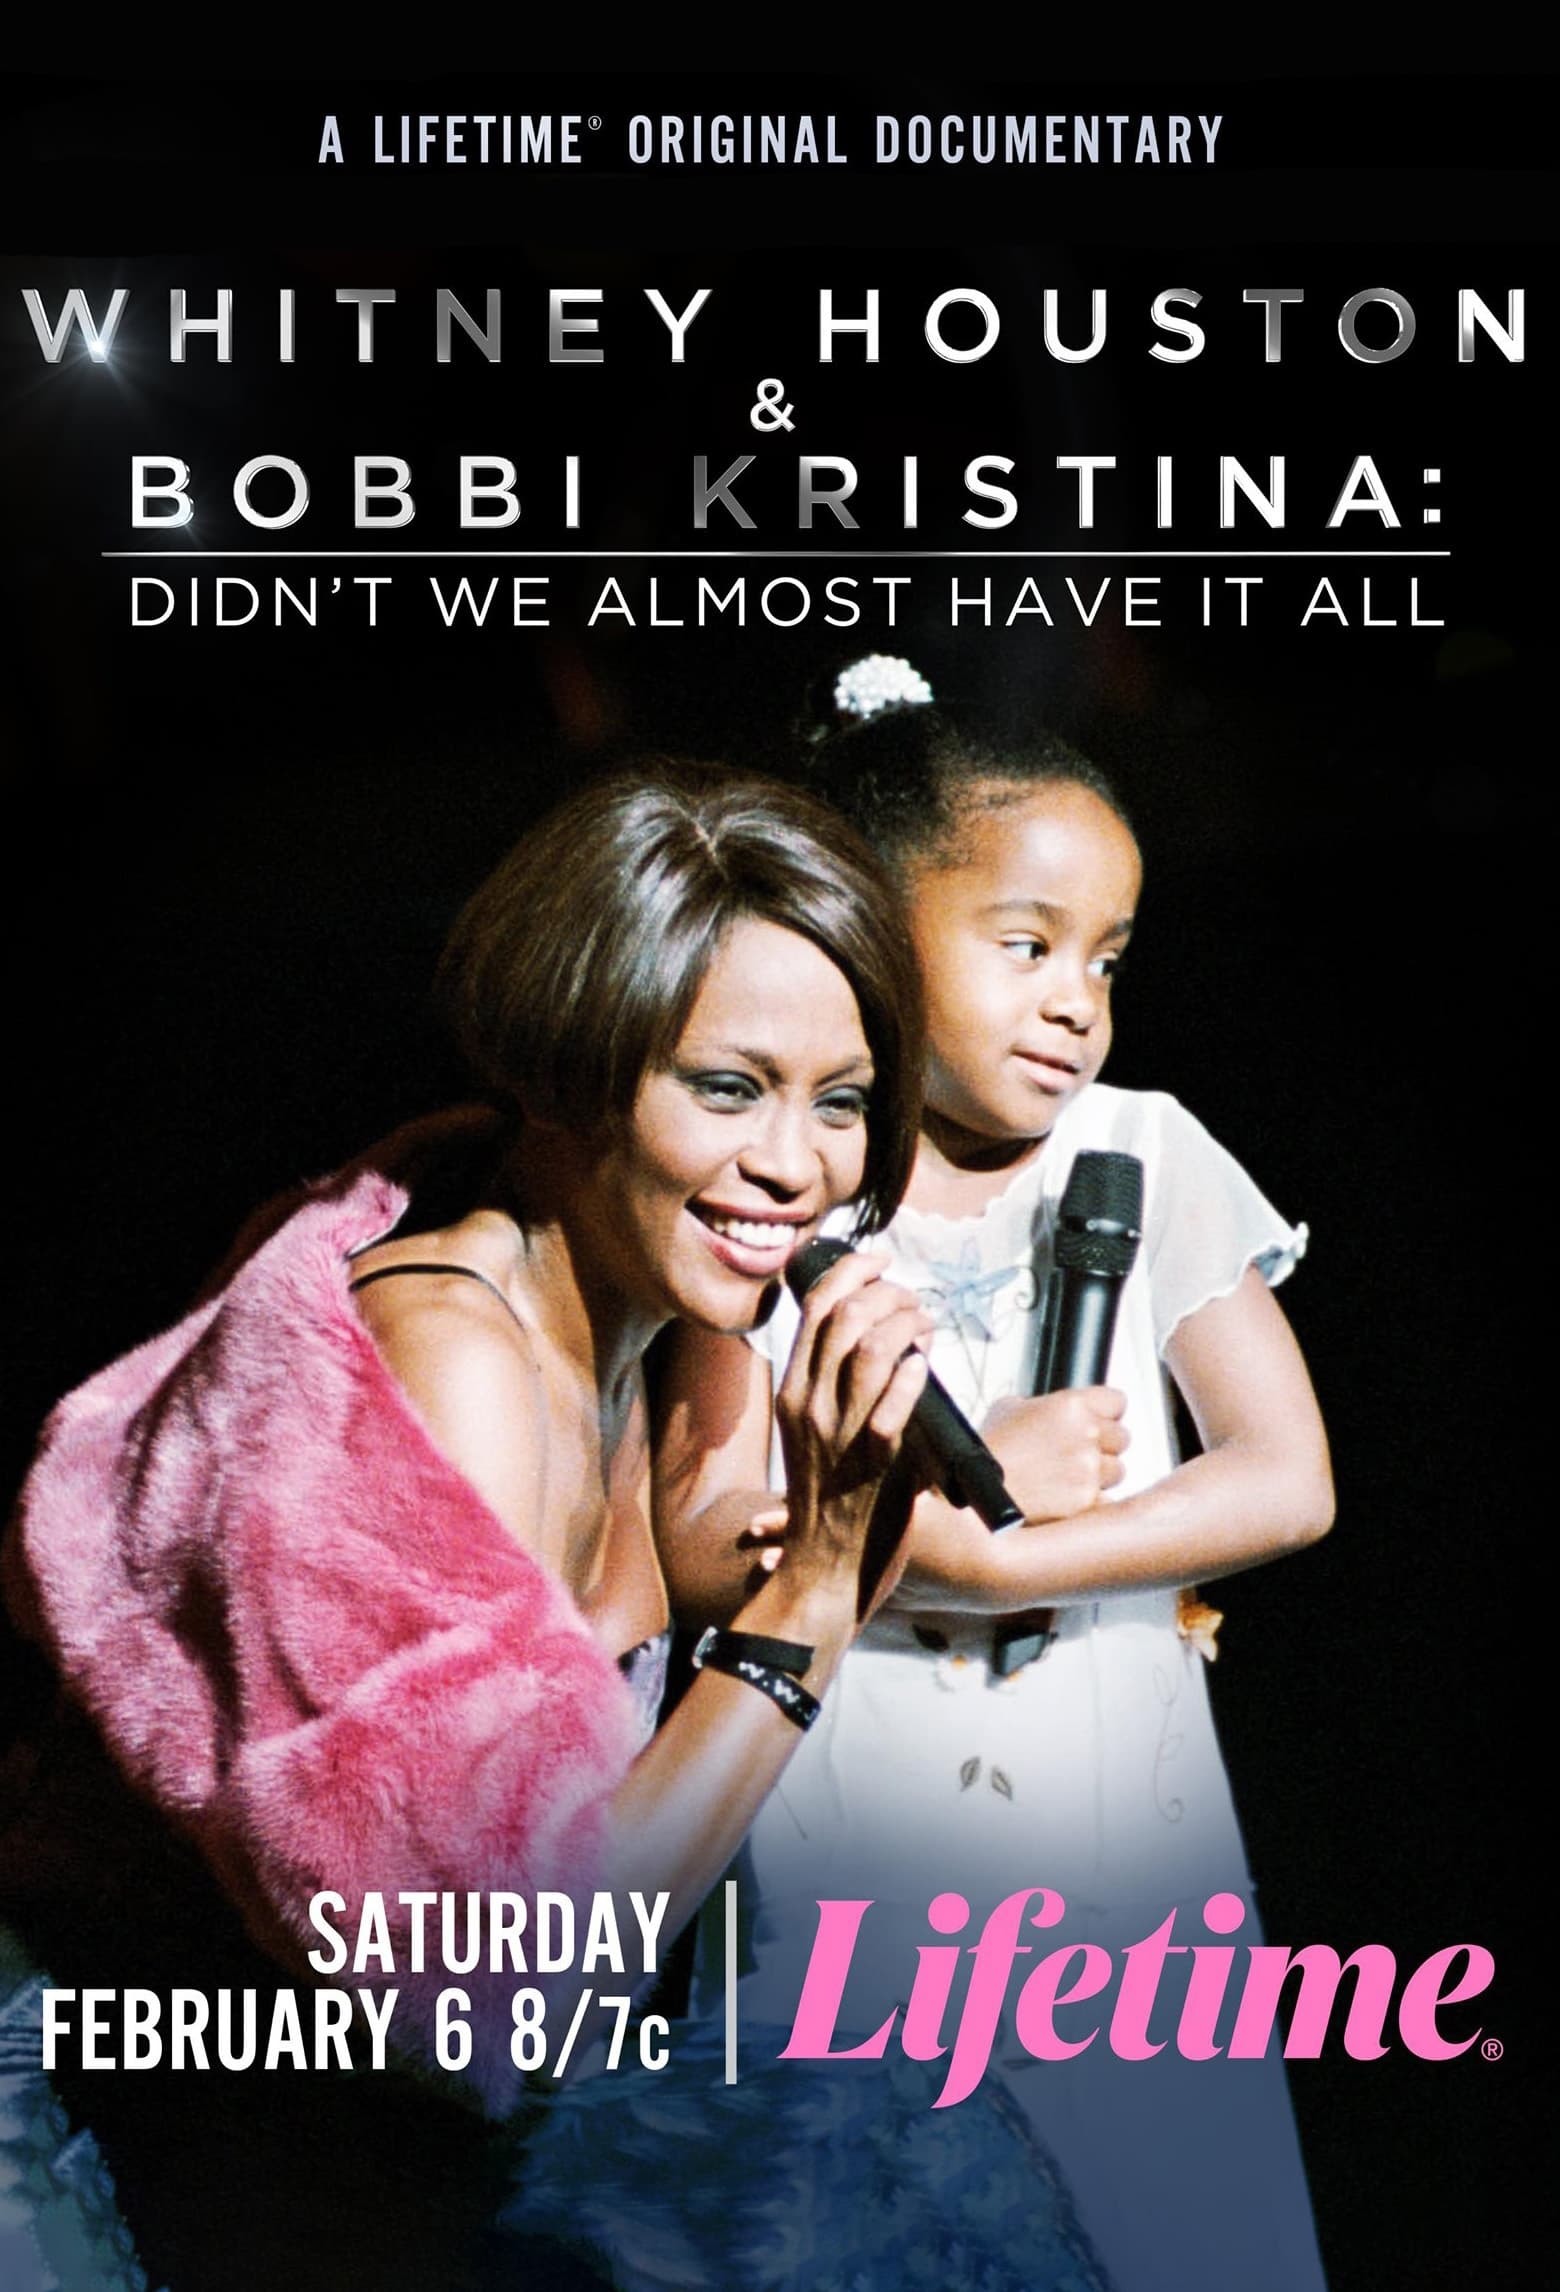 Whitney Houston & Bobbi Kristina: Didn't We Almost Have It All